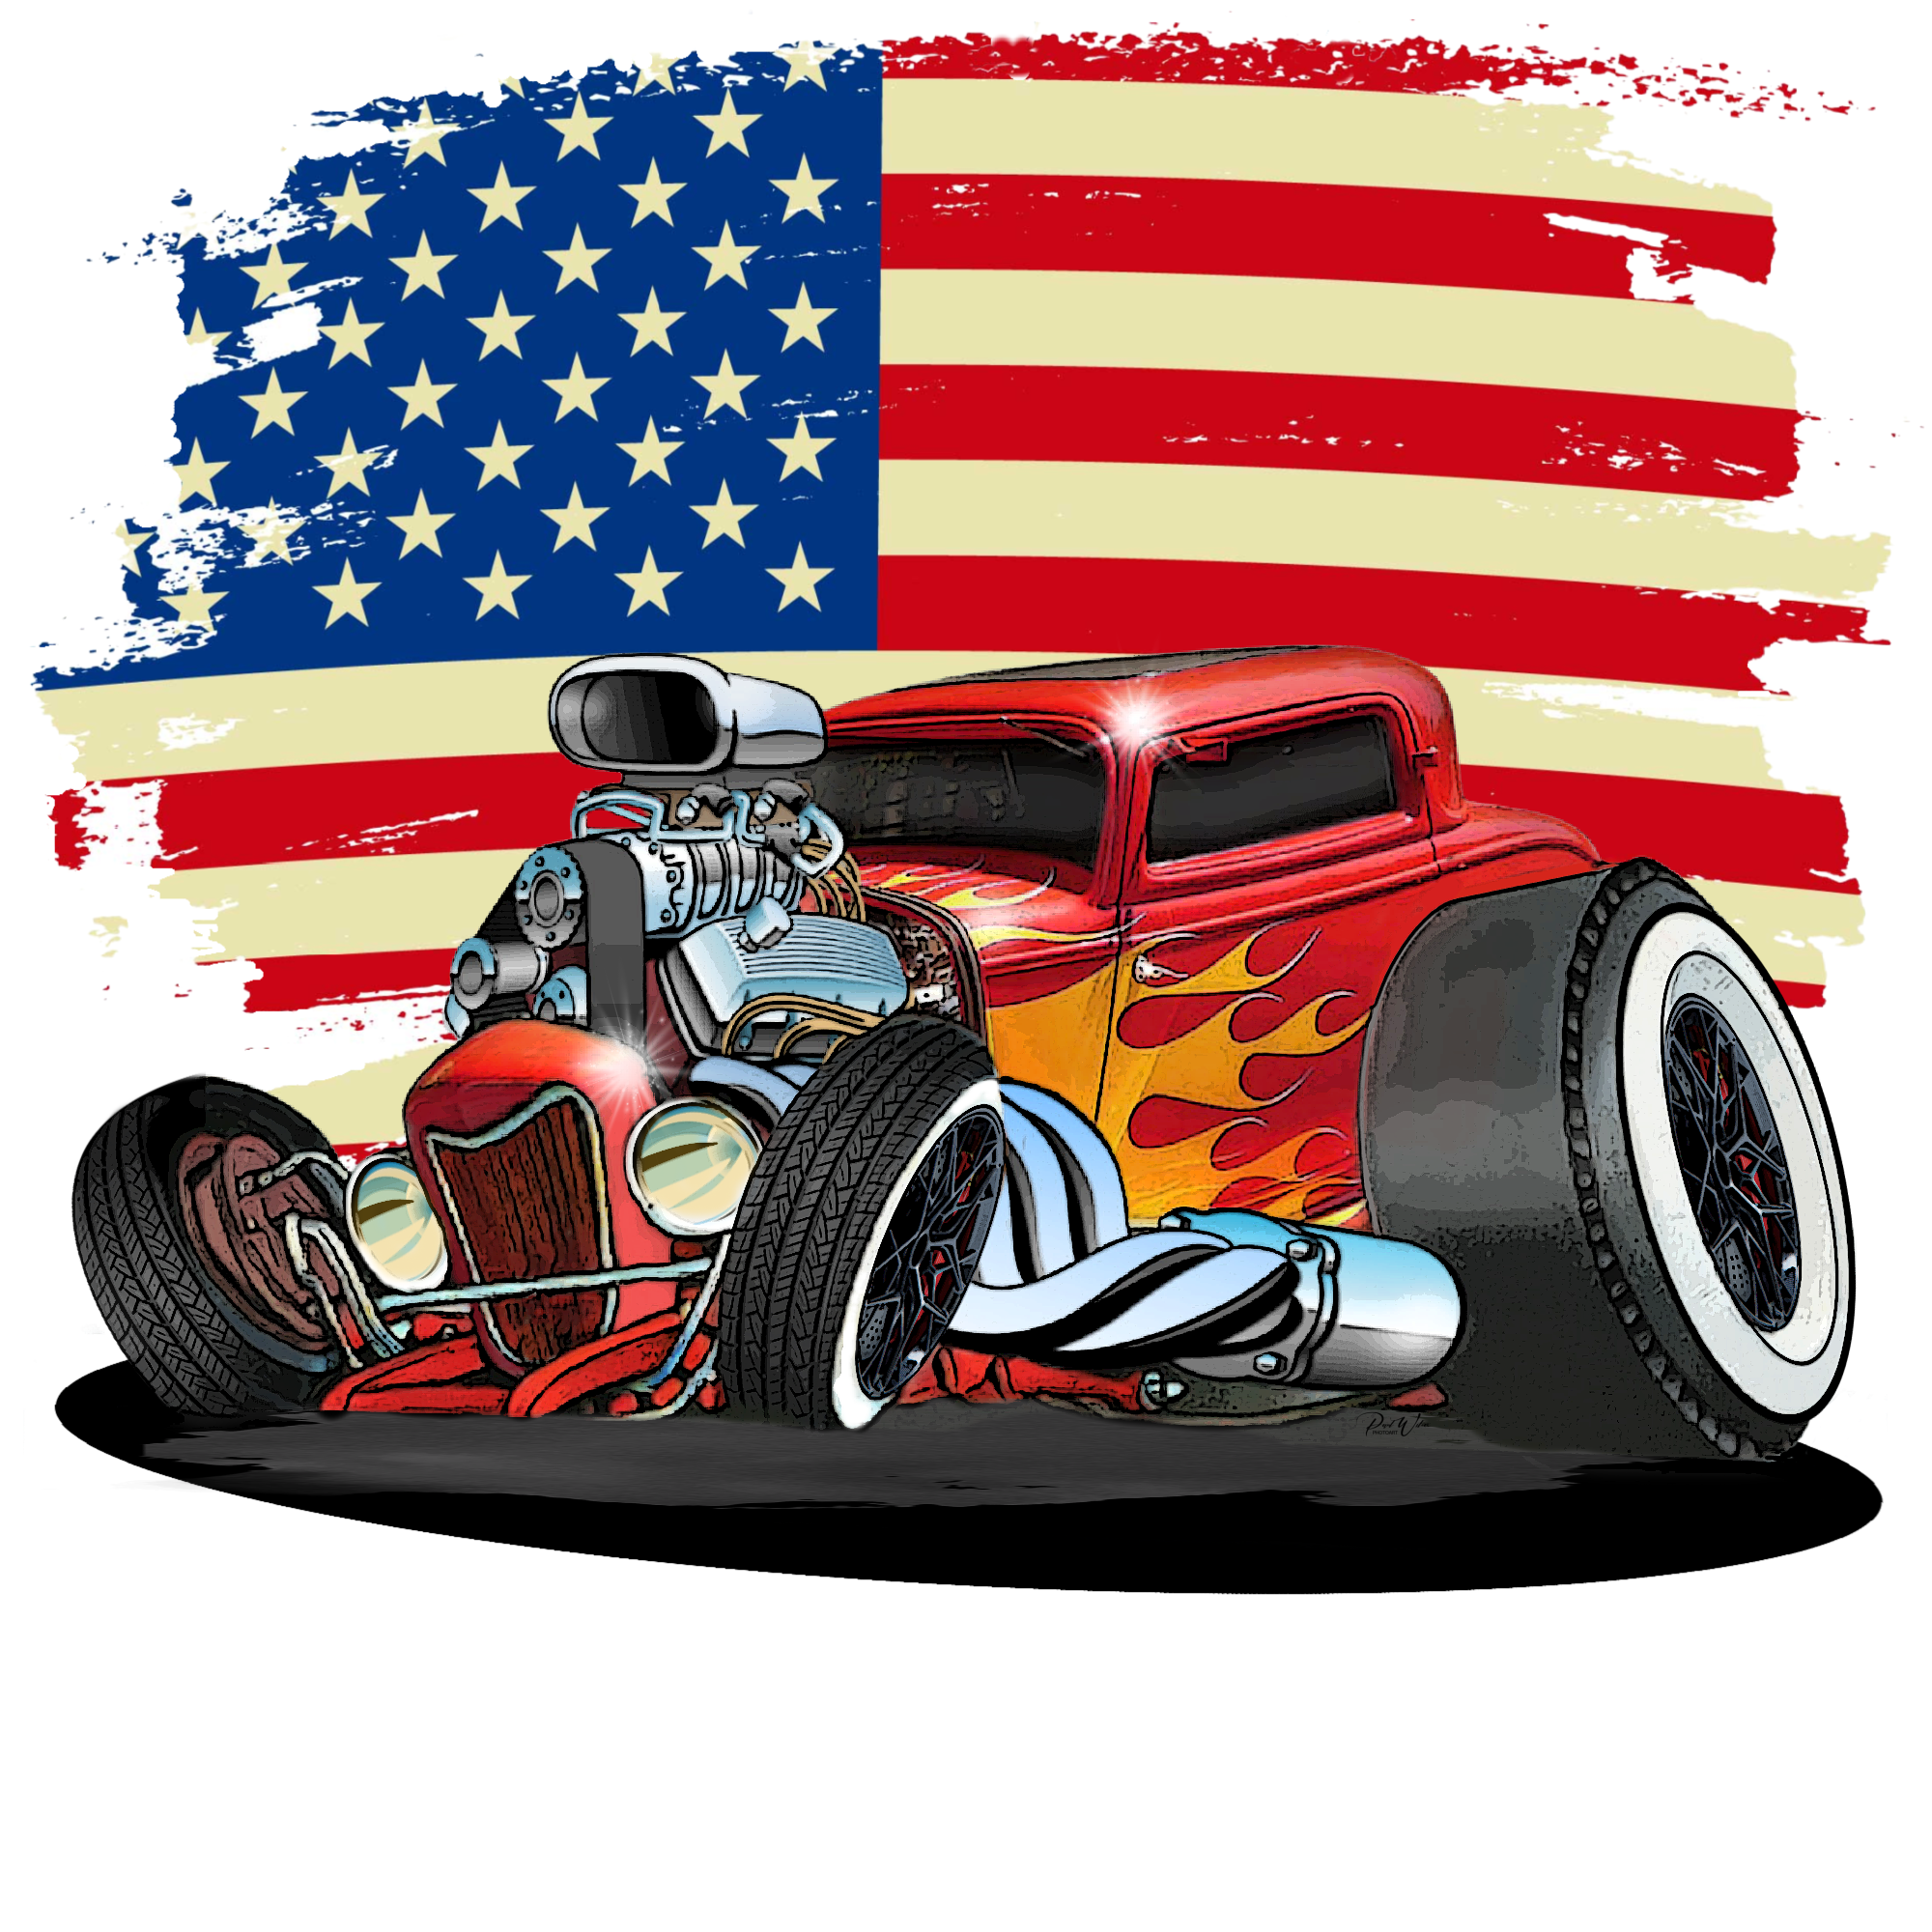 Hot Rod Car with the American Flag - Image